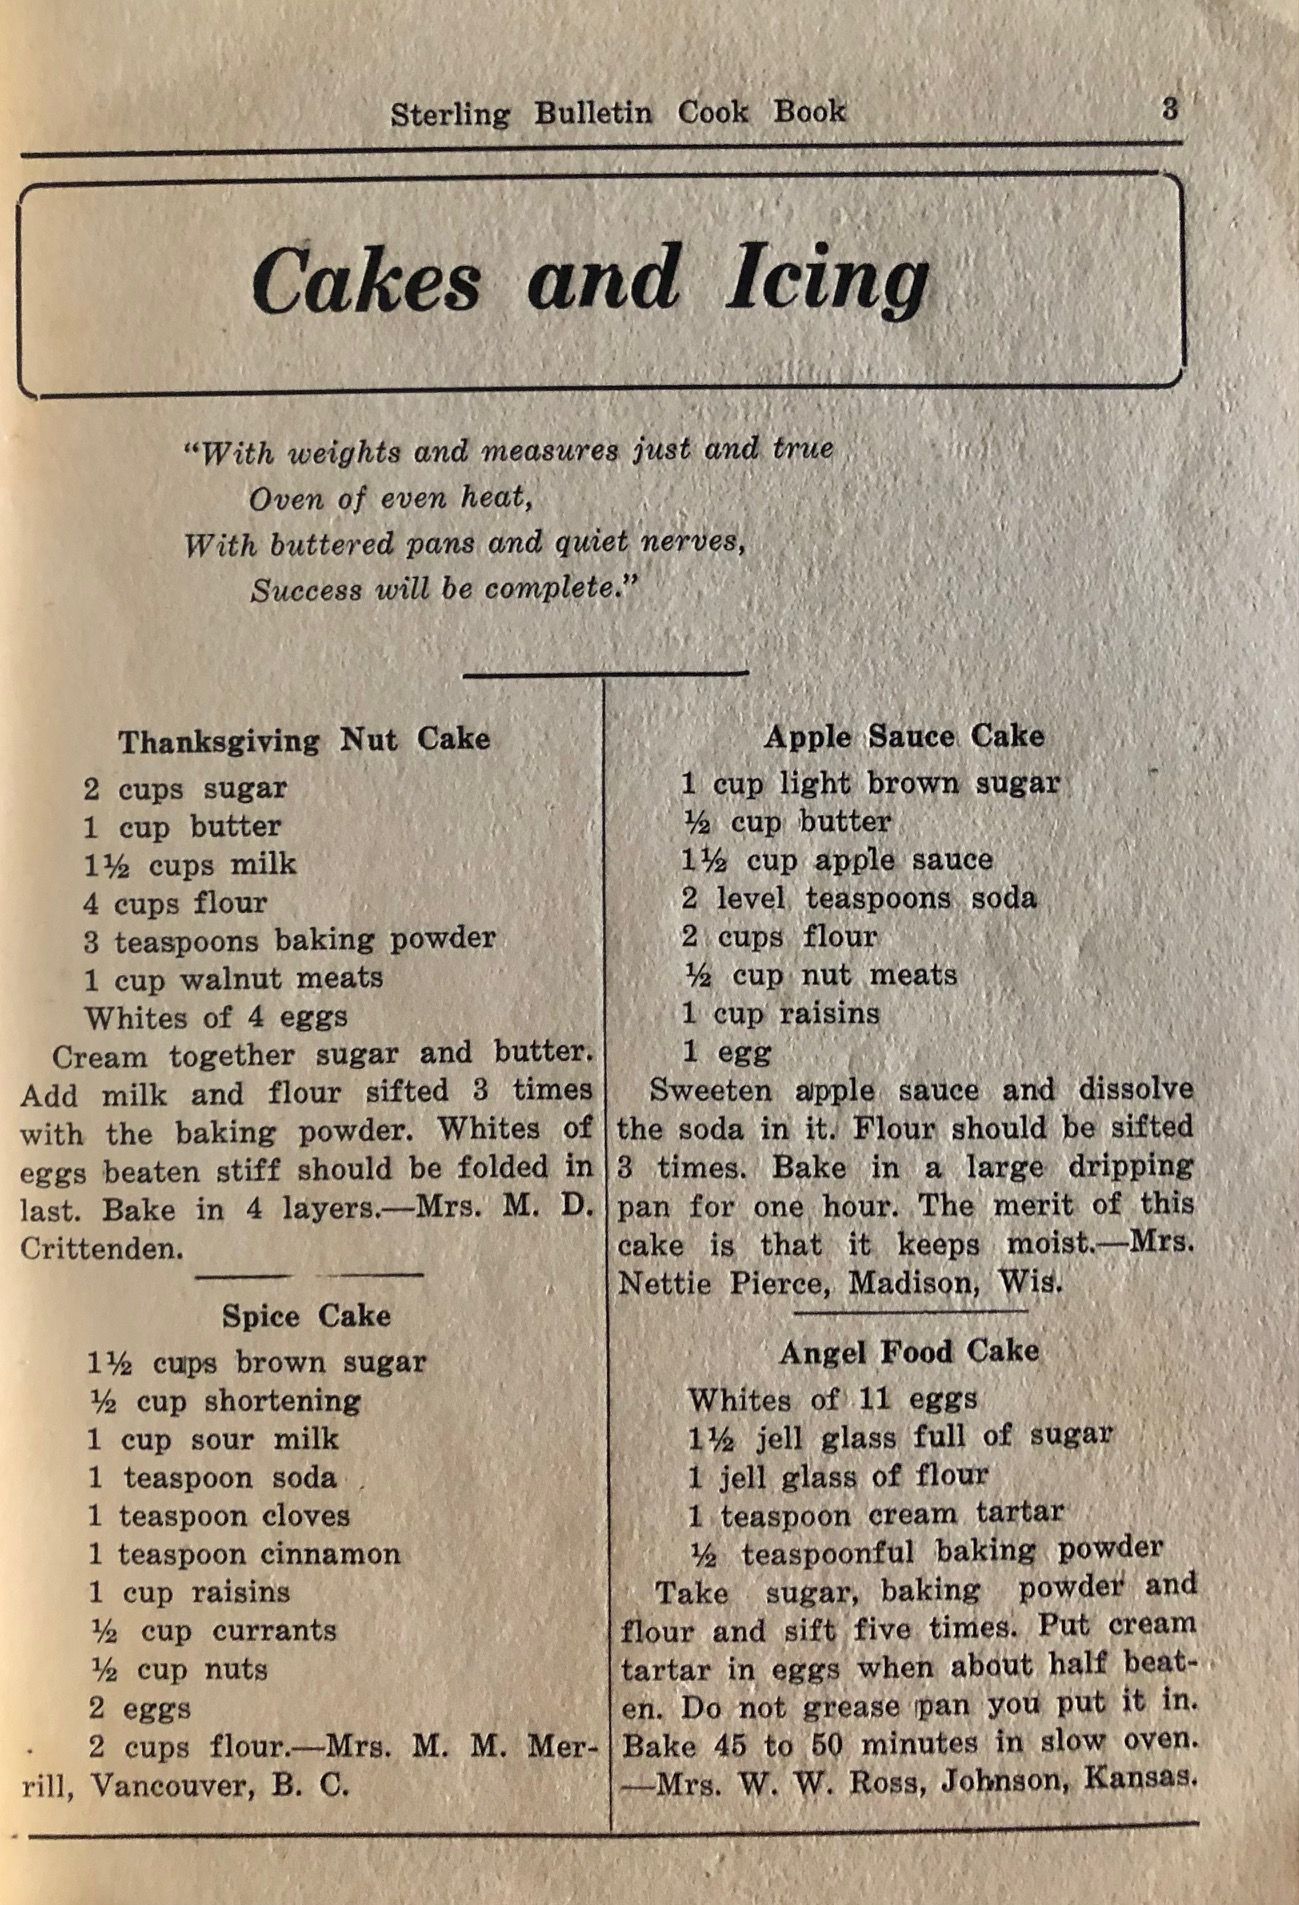 (Kansas) The Bulletin Cook Book: A Collection of Tested Recipes contributed by Readers and Friends of the Old Home Paper